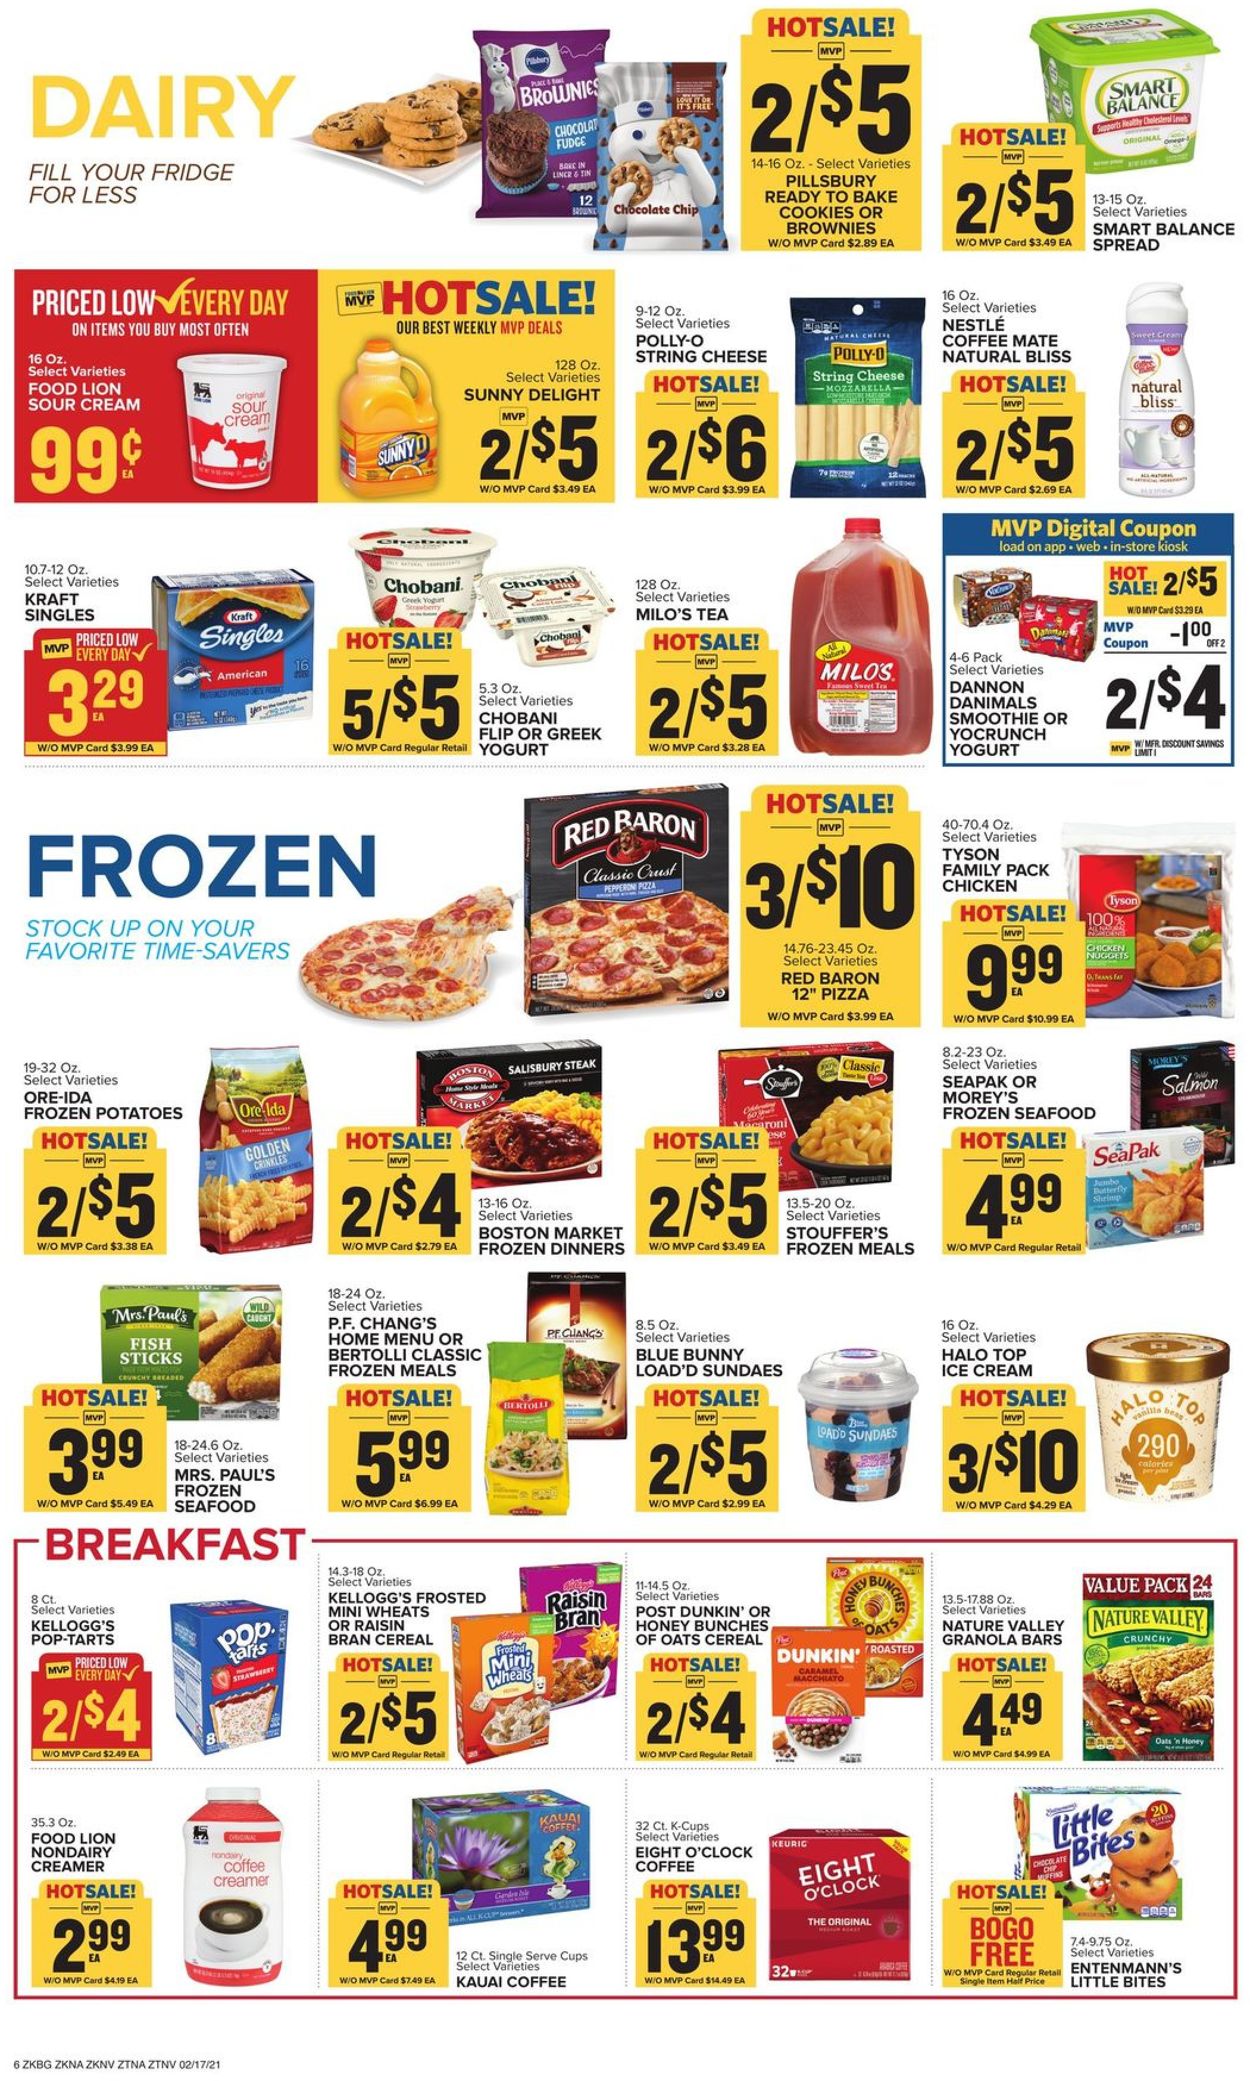 Food Lion Ad from 02/17/2021